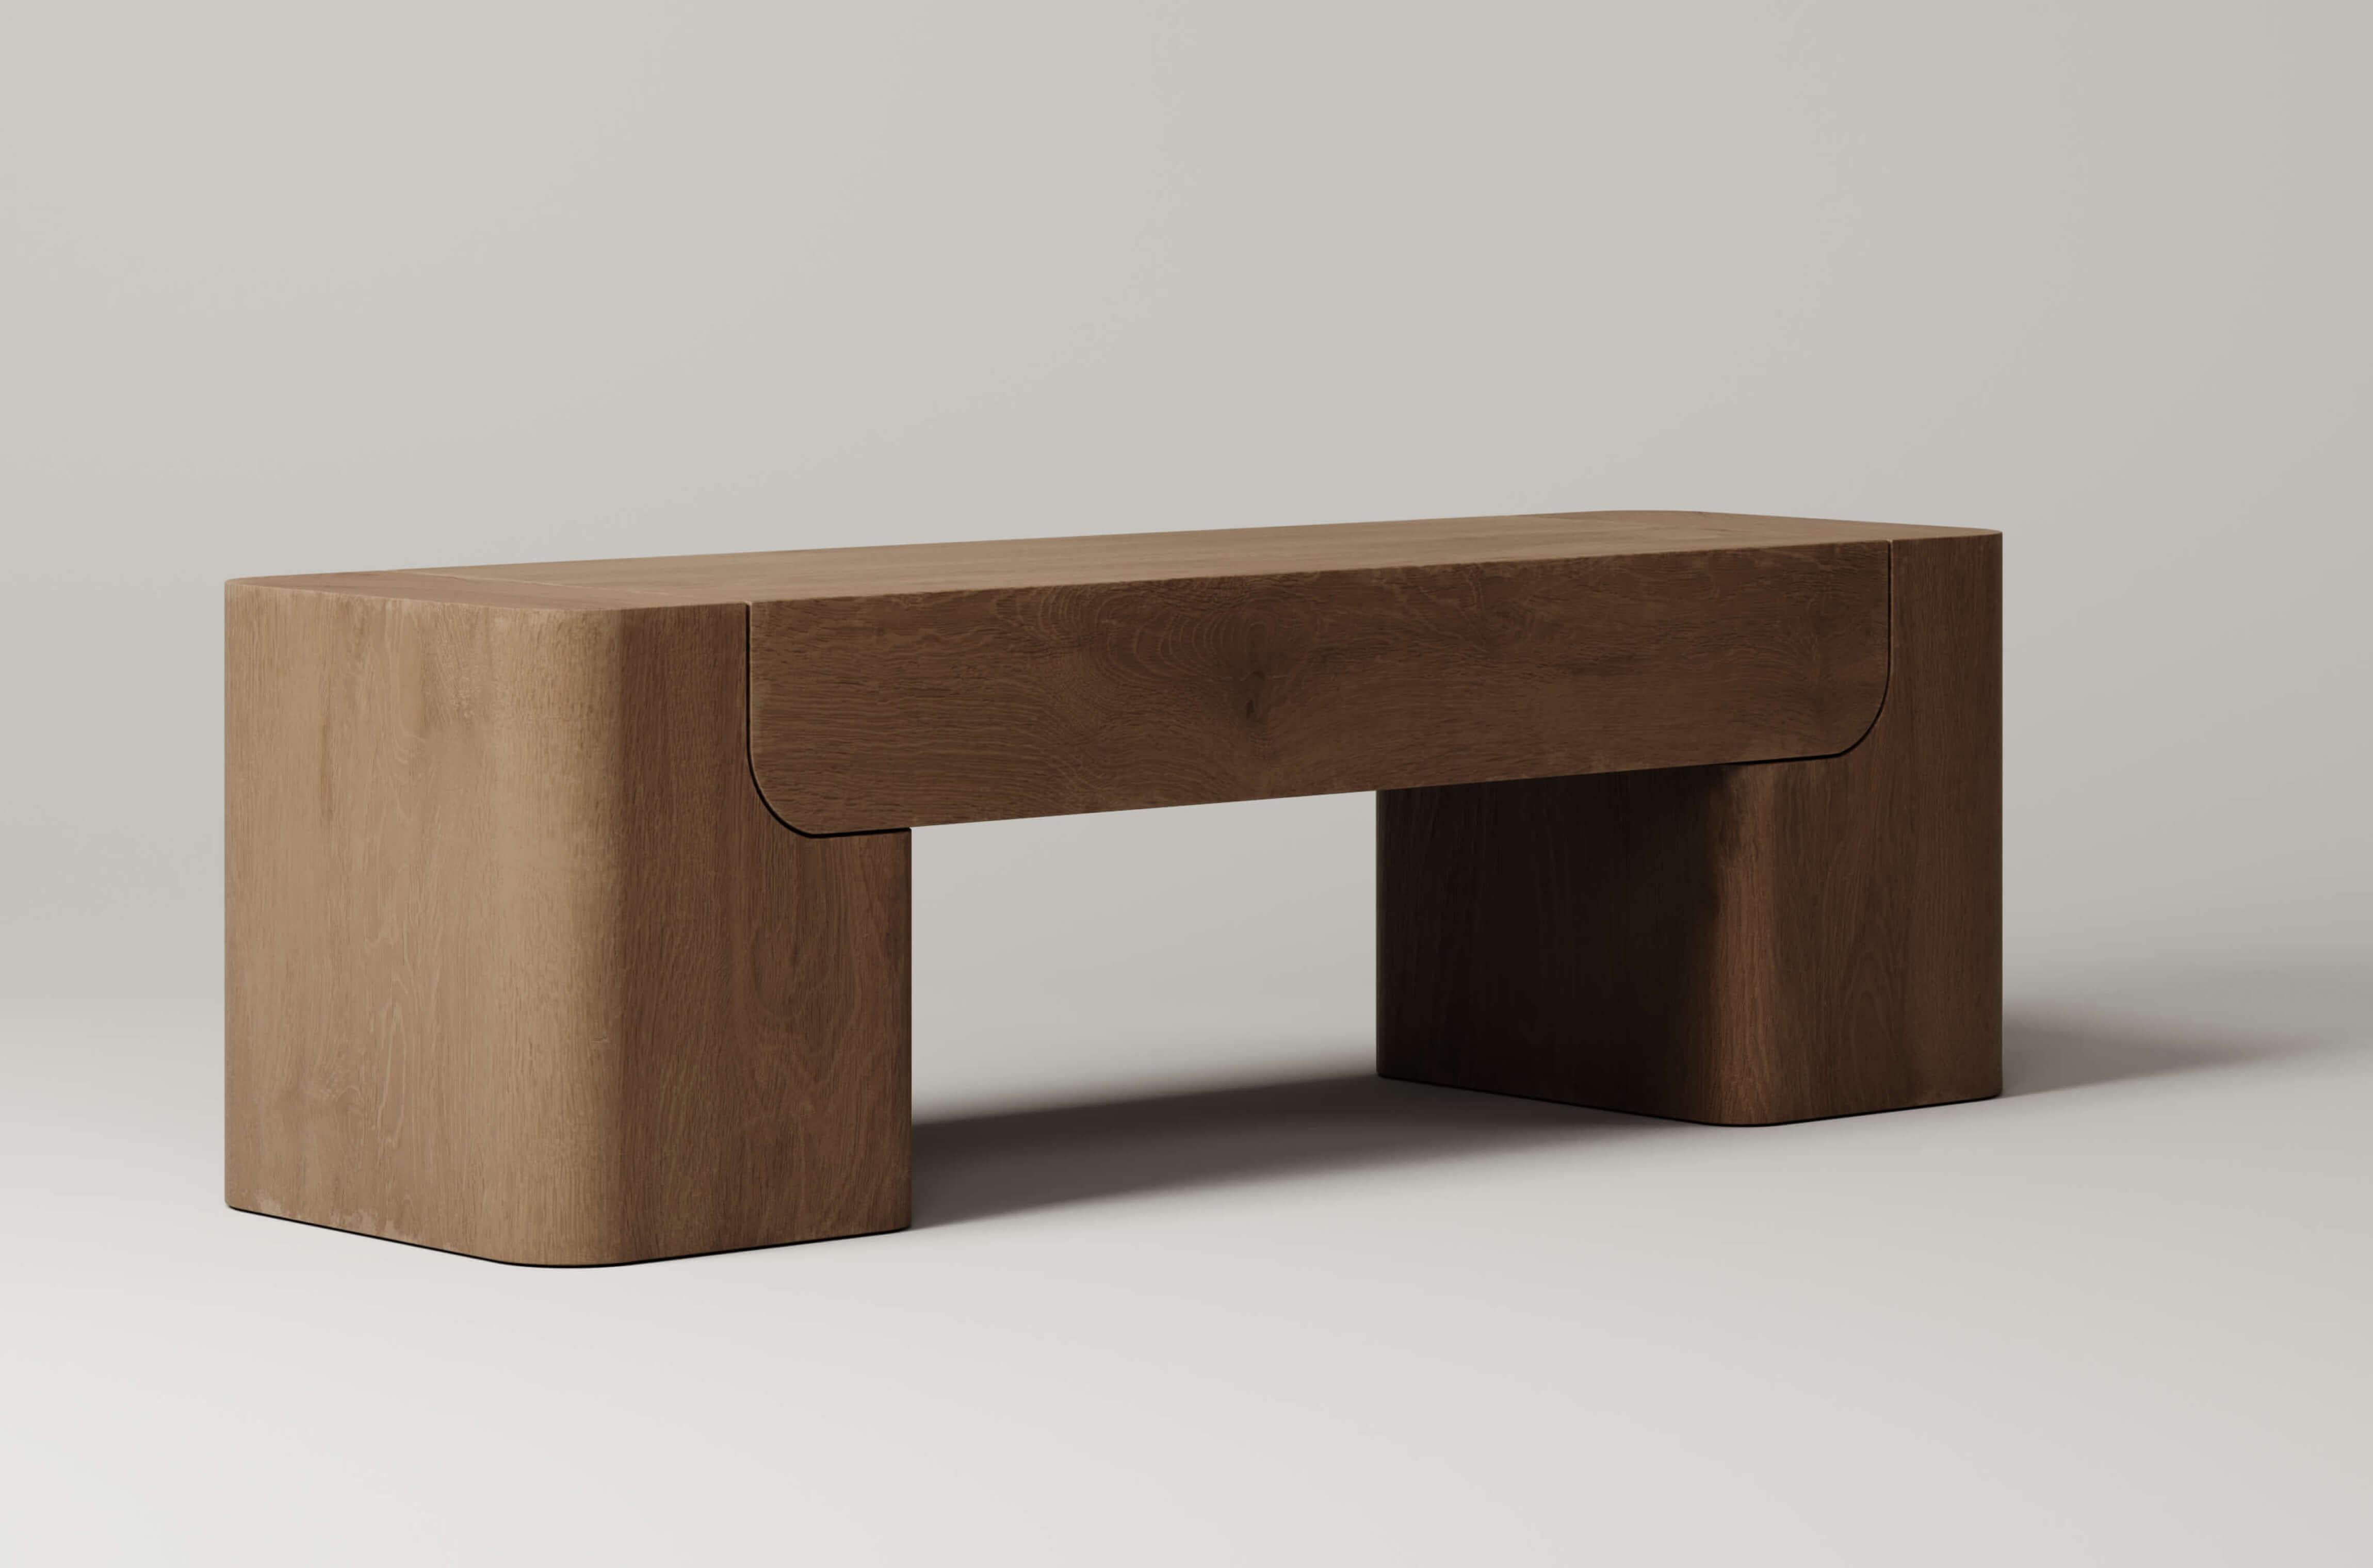 M_005 White Oak Bench by Monolith Studio
Signed and Numbered.
Dimensions: D 40 x W 132 x H 40 cm.
Materials: White Oak.

Available in travertine, walnut, white oak and lava rock.  Please contact us. 

Monolith, founded in 2022 by Marc Personick,